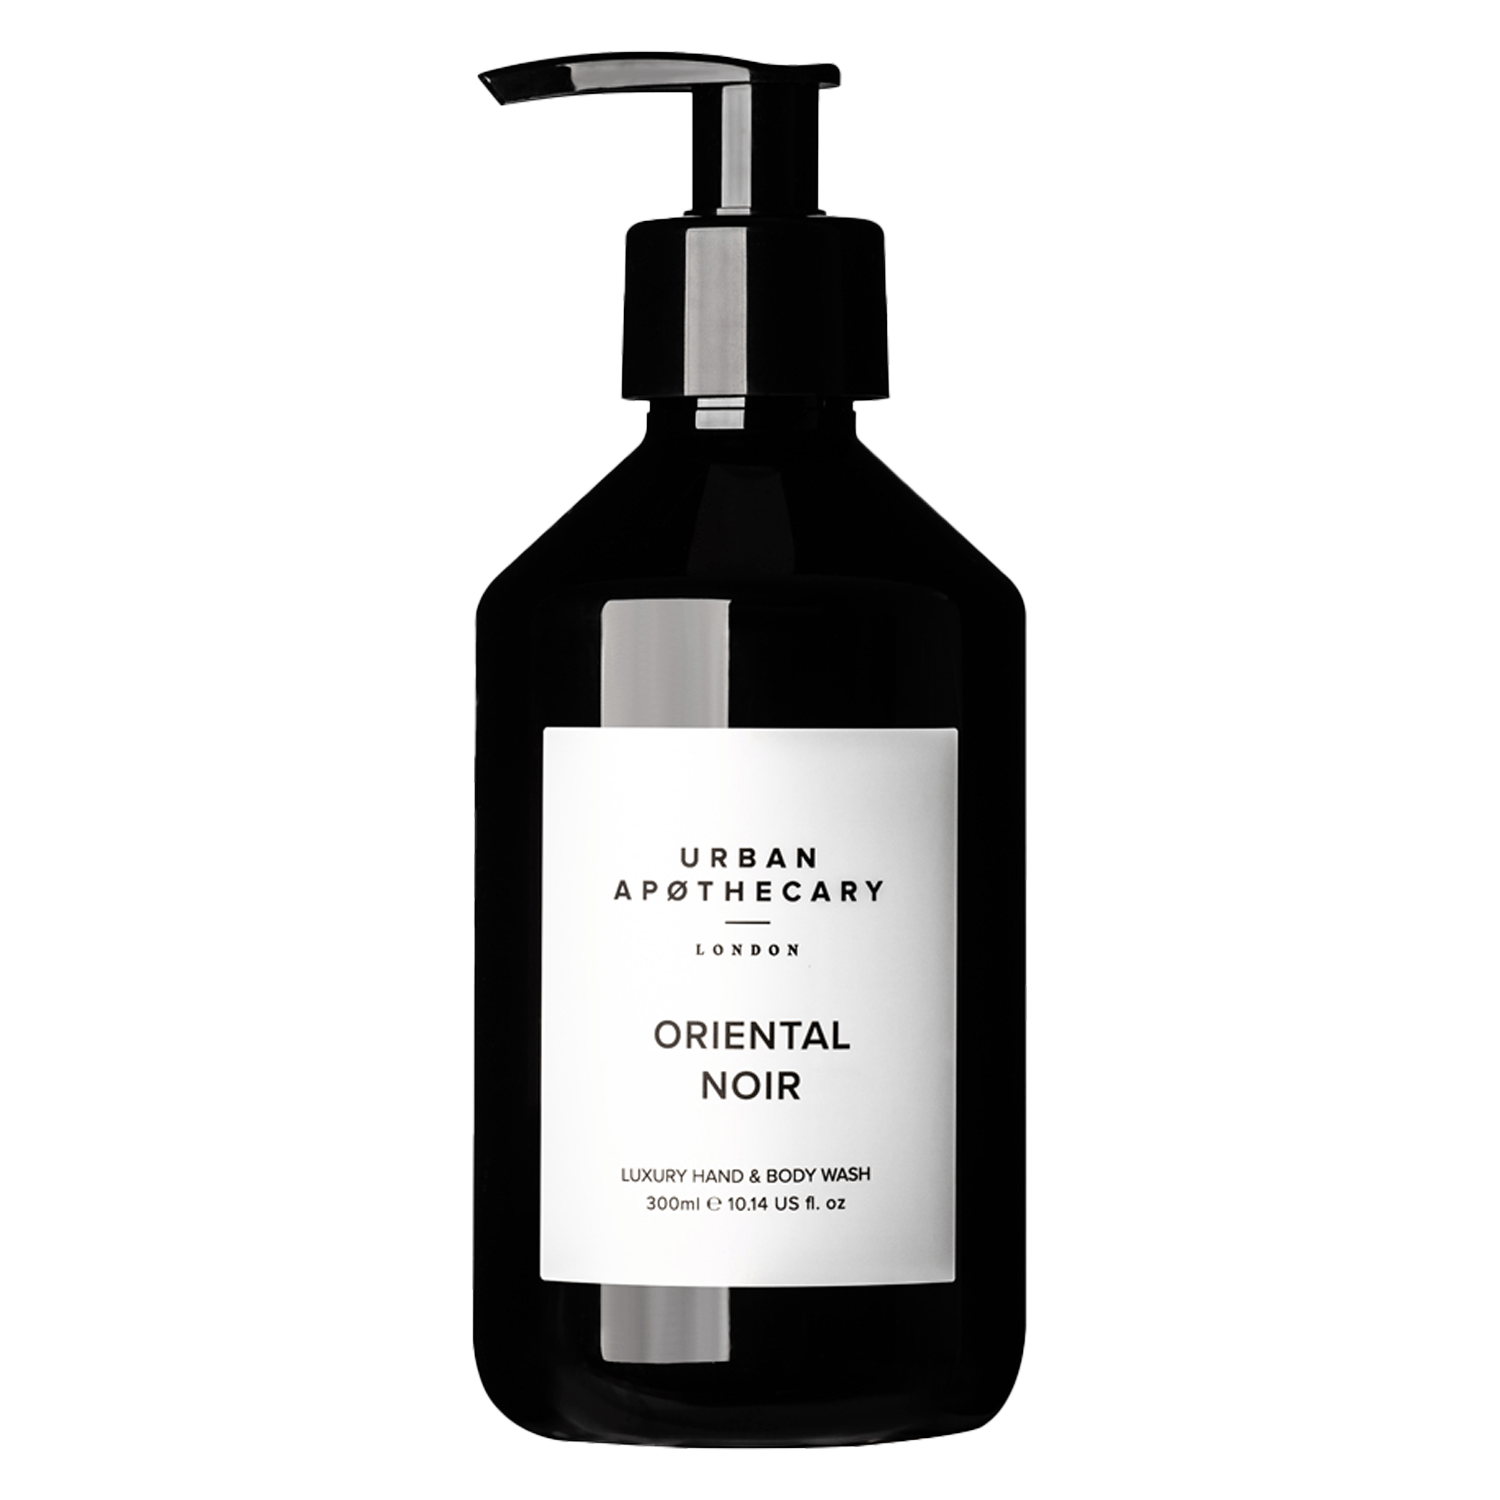 Product image from Urban Apothecary - Luxury Hand & Body Wash Oriental Noir